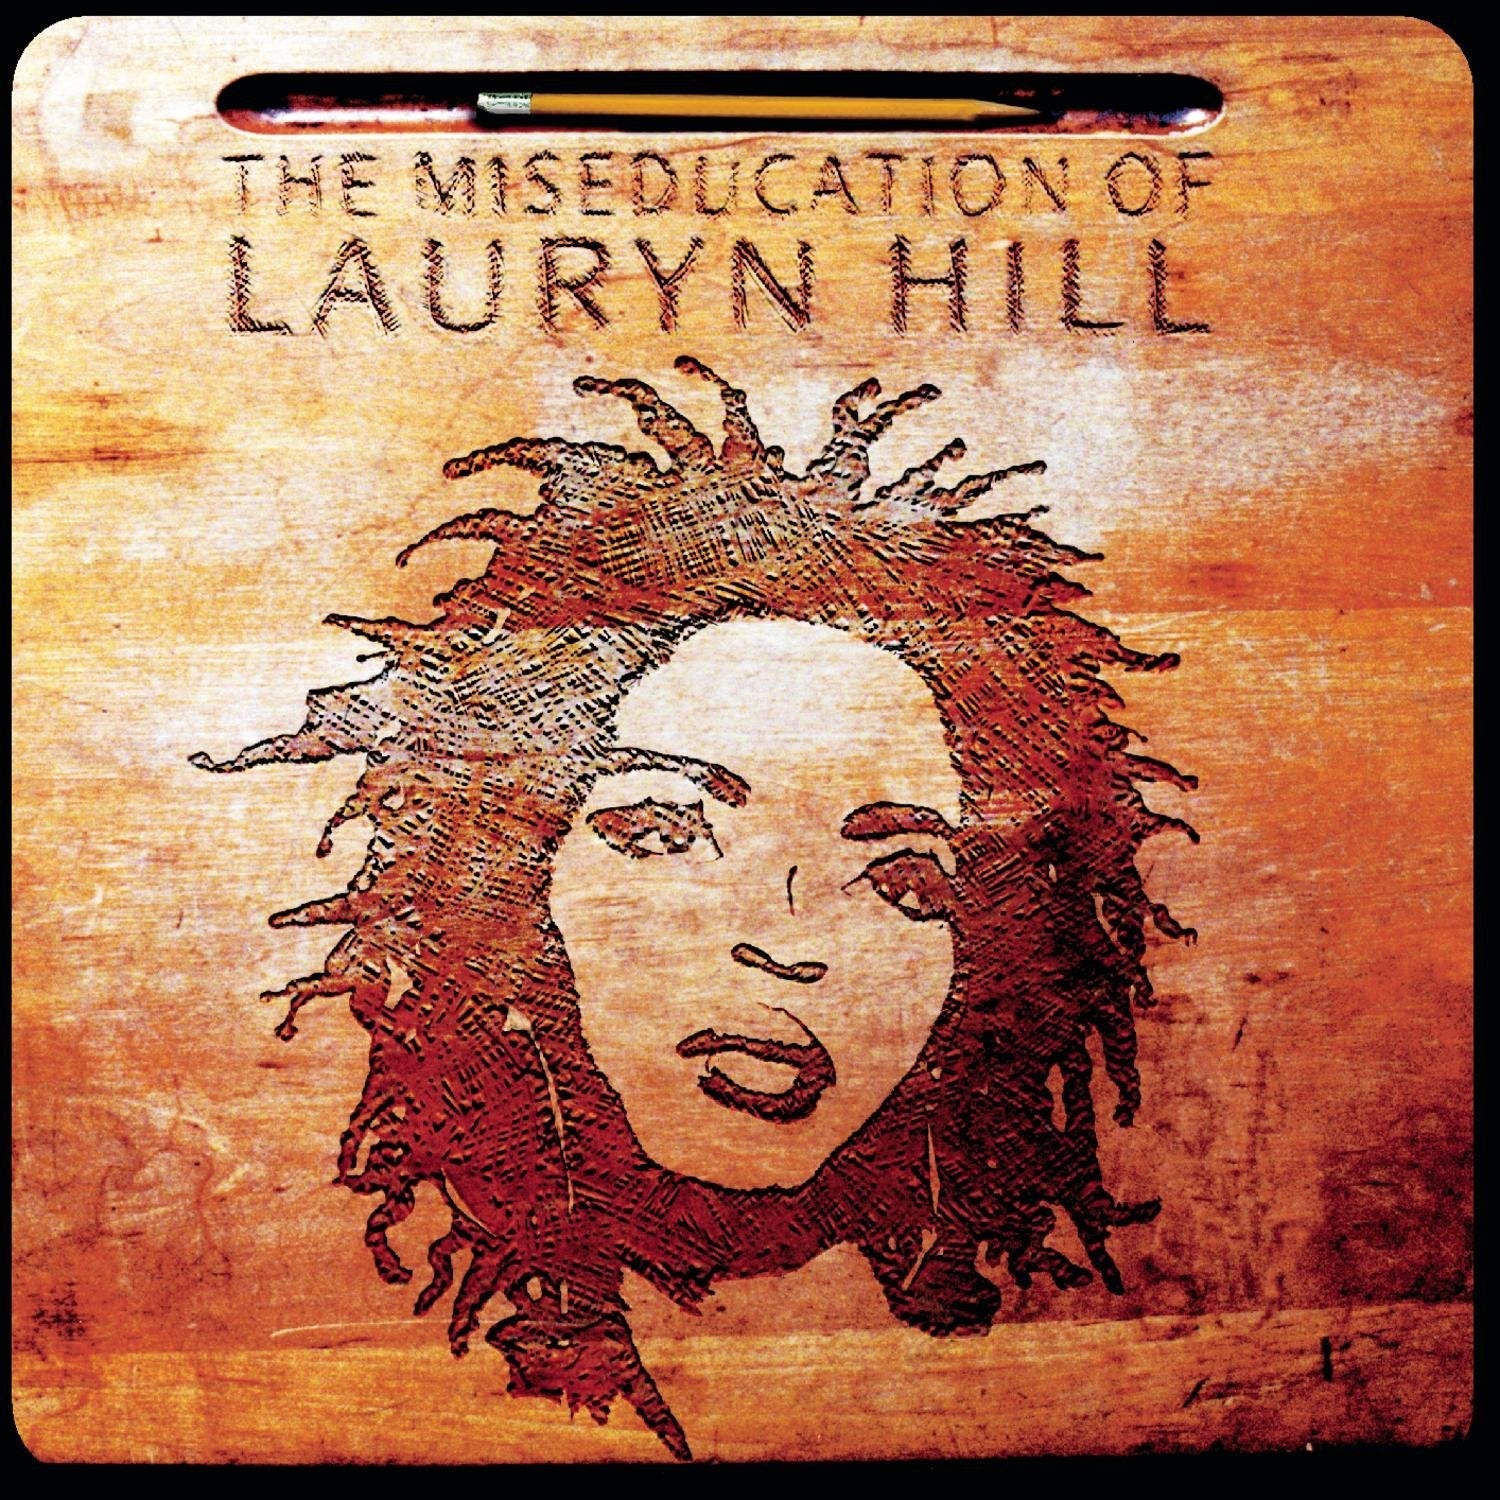 lauryn hill the miseducation of lauryn hill 2lp vinyl record on the jungle floor